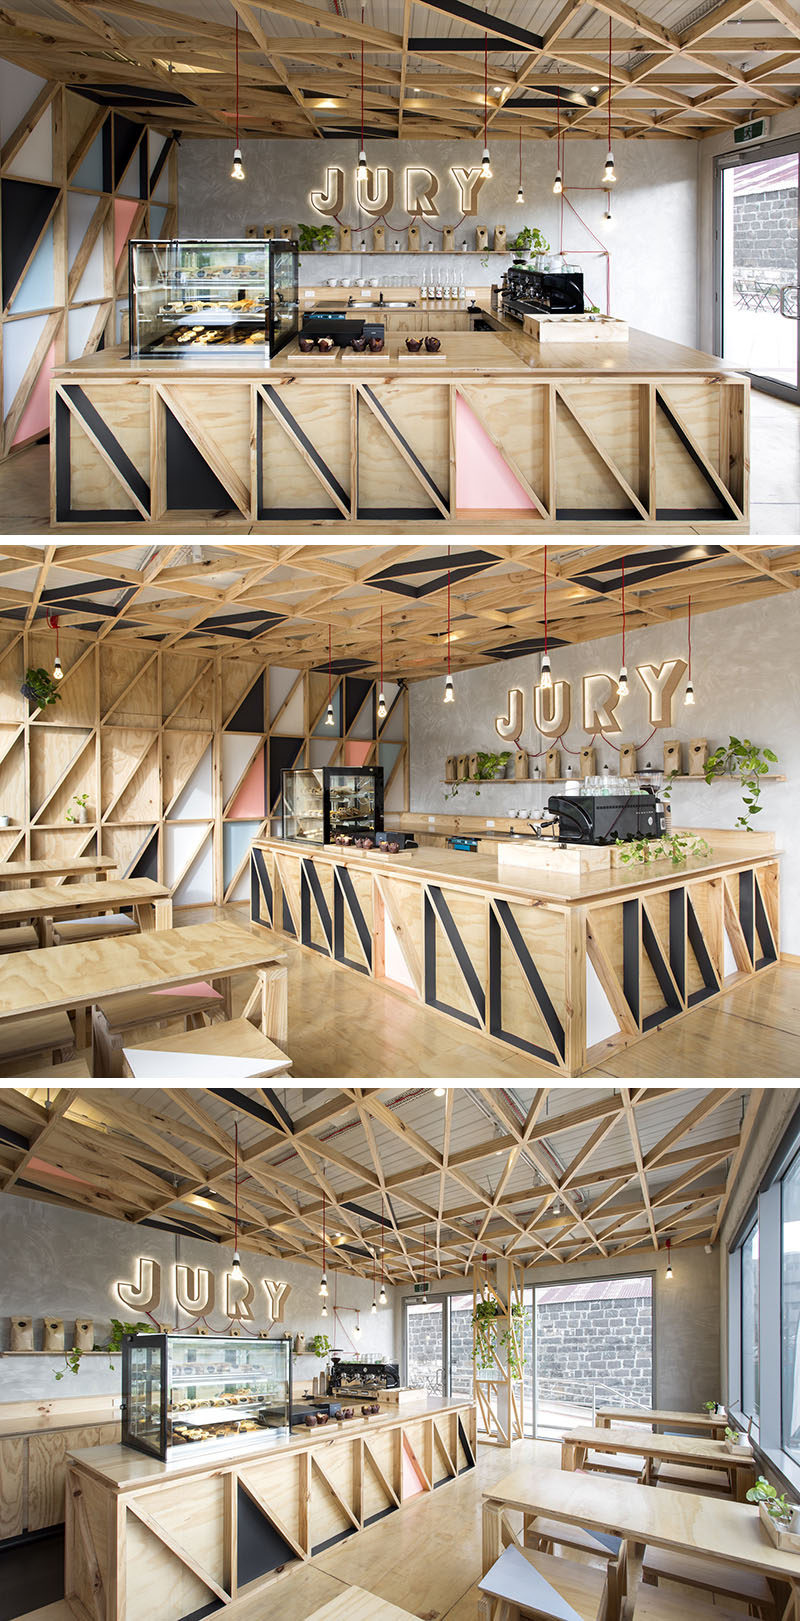 This modern coffee shop has been designed with a diagonal wood pattern on the wall, ceiling and bar front.